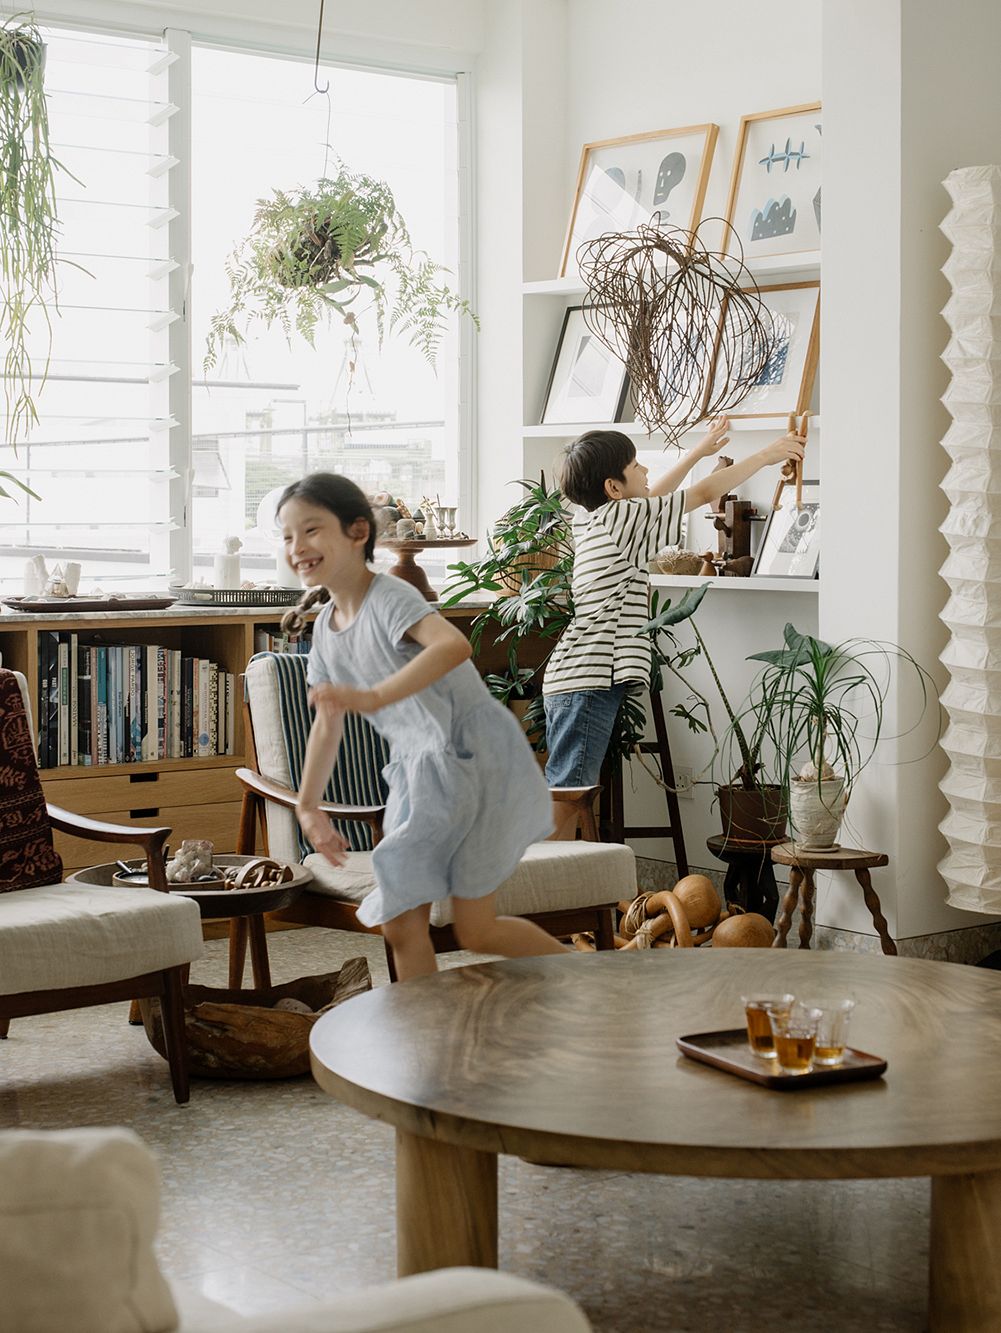 The home of designers Marc Webb and Naoko Takenouchi